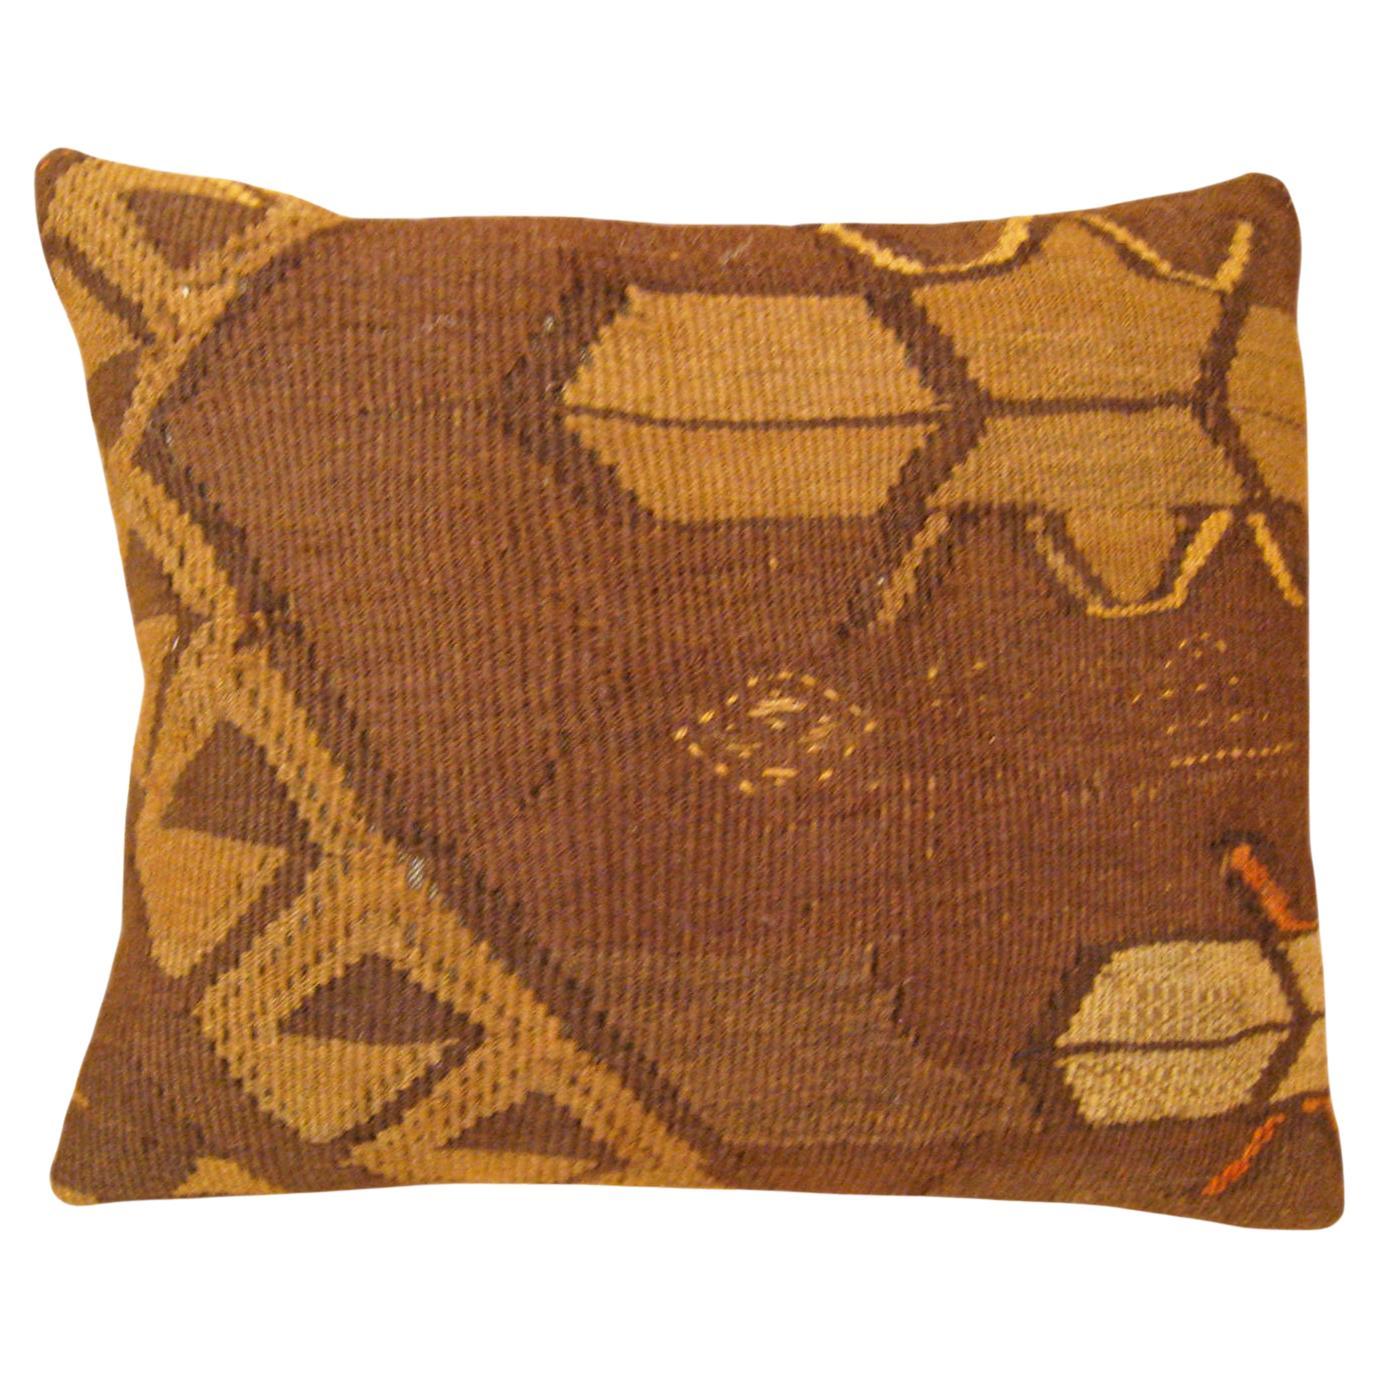 Decorative Vintage Turkish Kilim Pillow with Geometric Abstracts For Sale